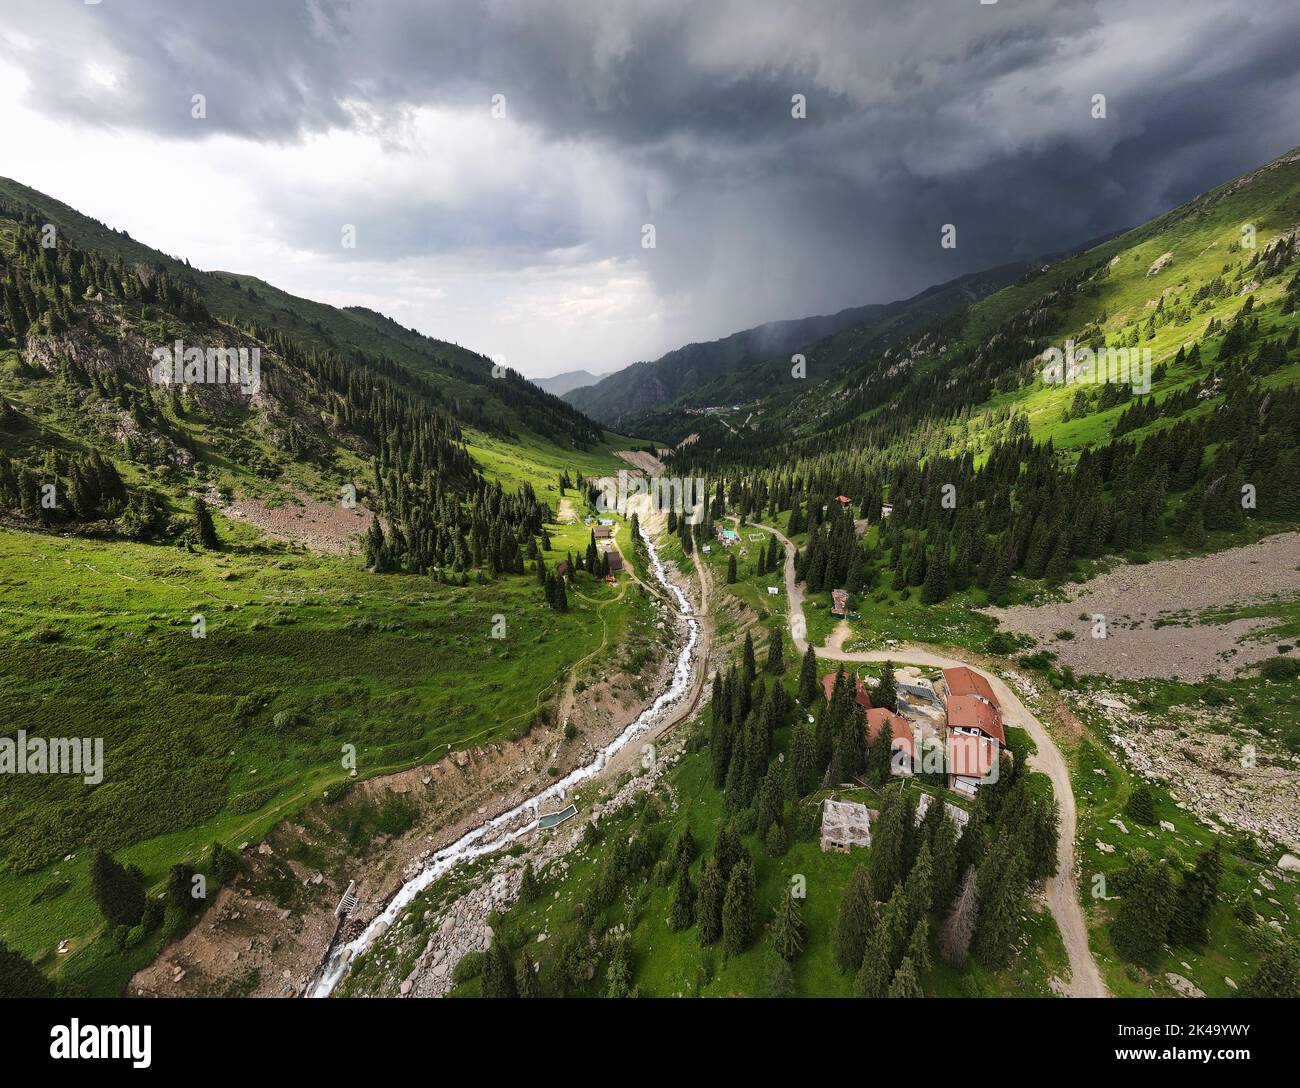 Beautiful scenery of the mountains  with green hill and river in at storm rain cloudy sky and resort in Almaty, Kazakhstan. Outdoor and hiking concept Stock Photo